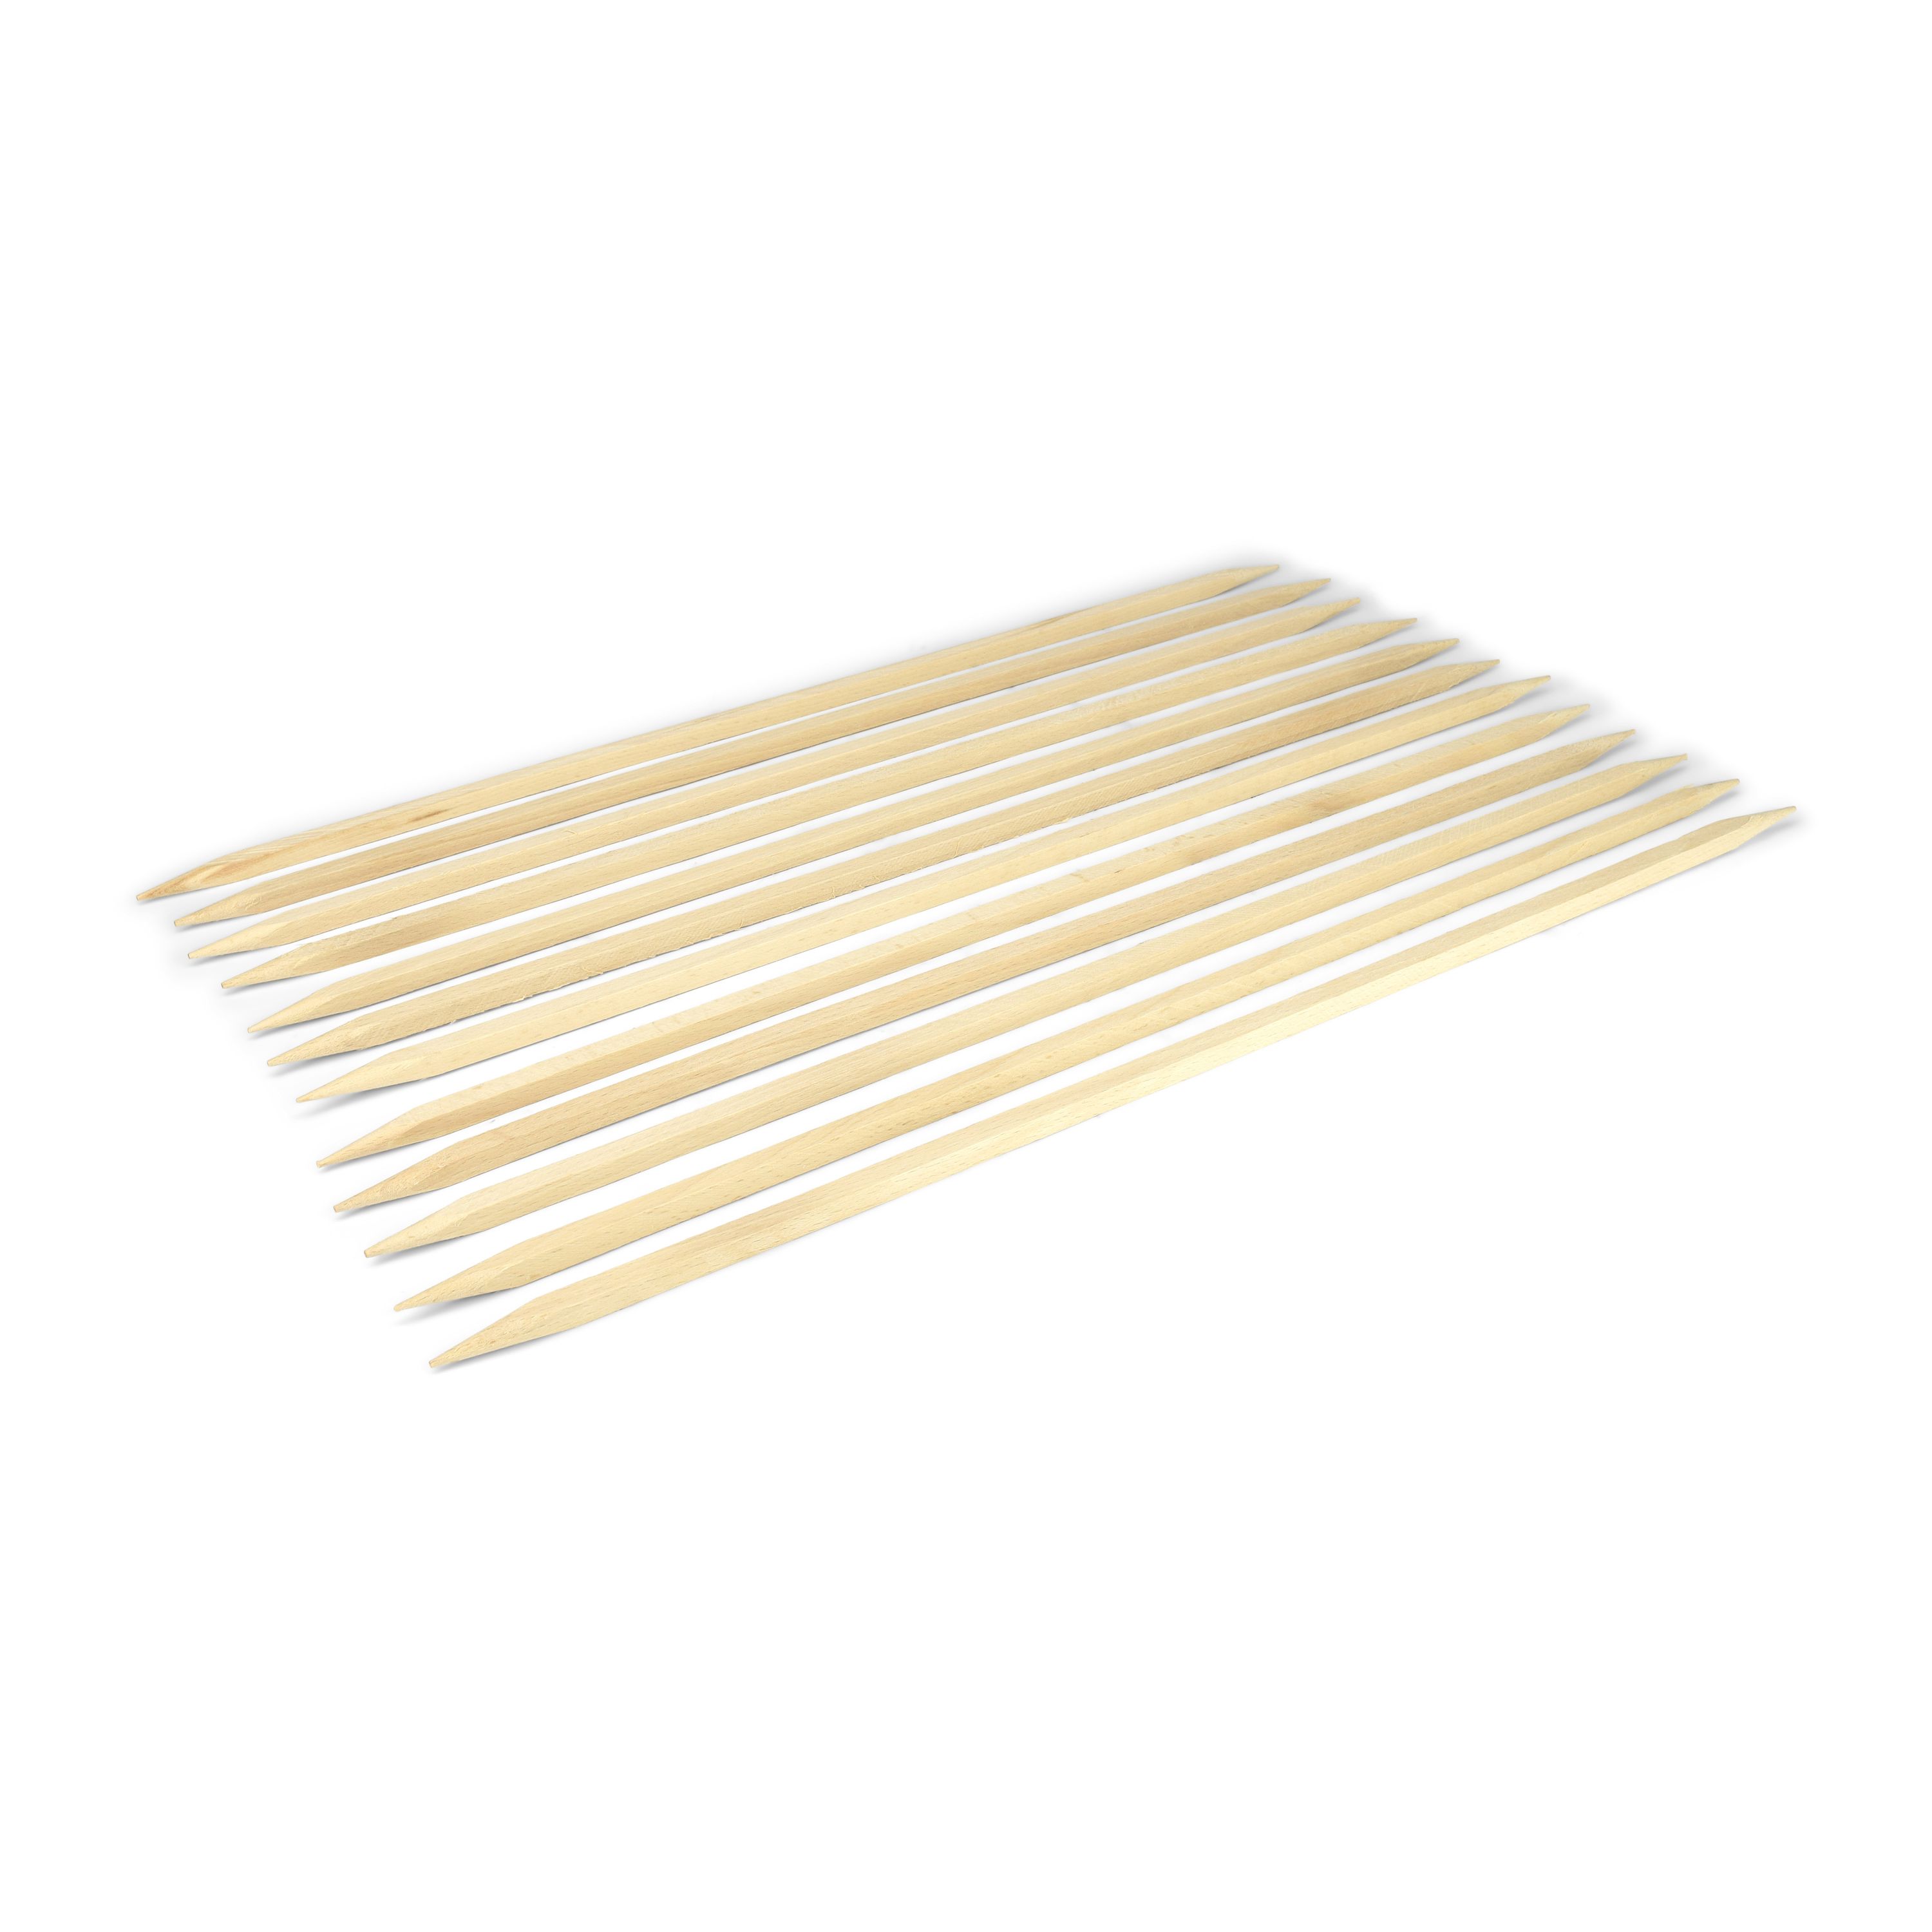 12 piece replacement skewers wood